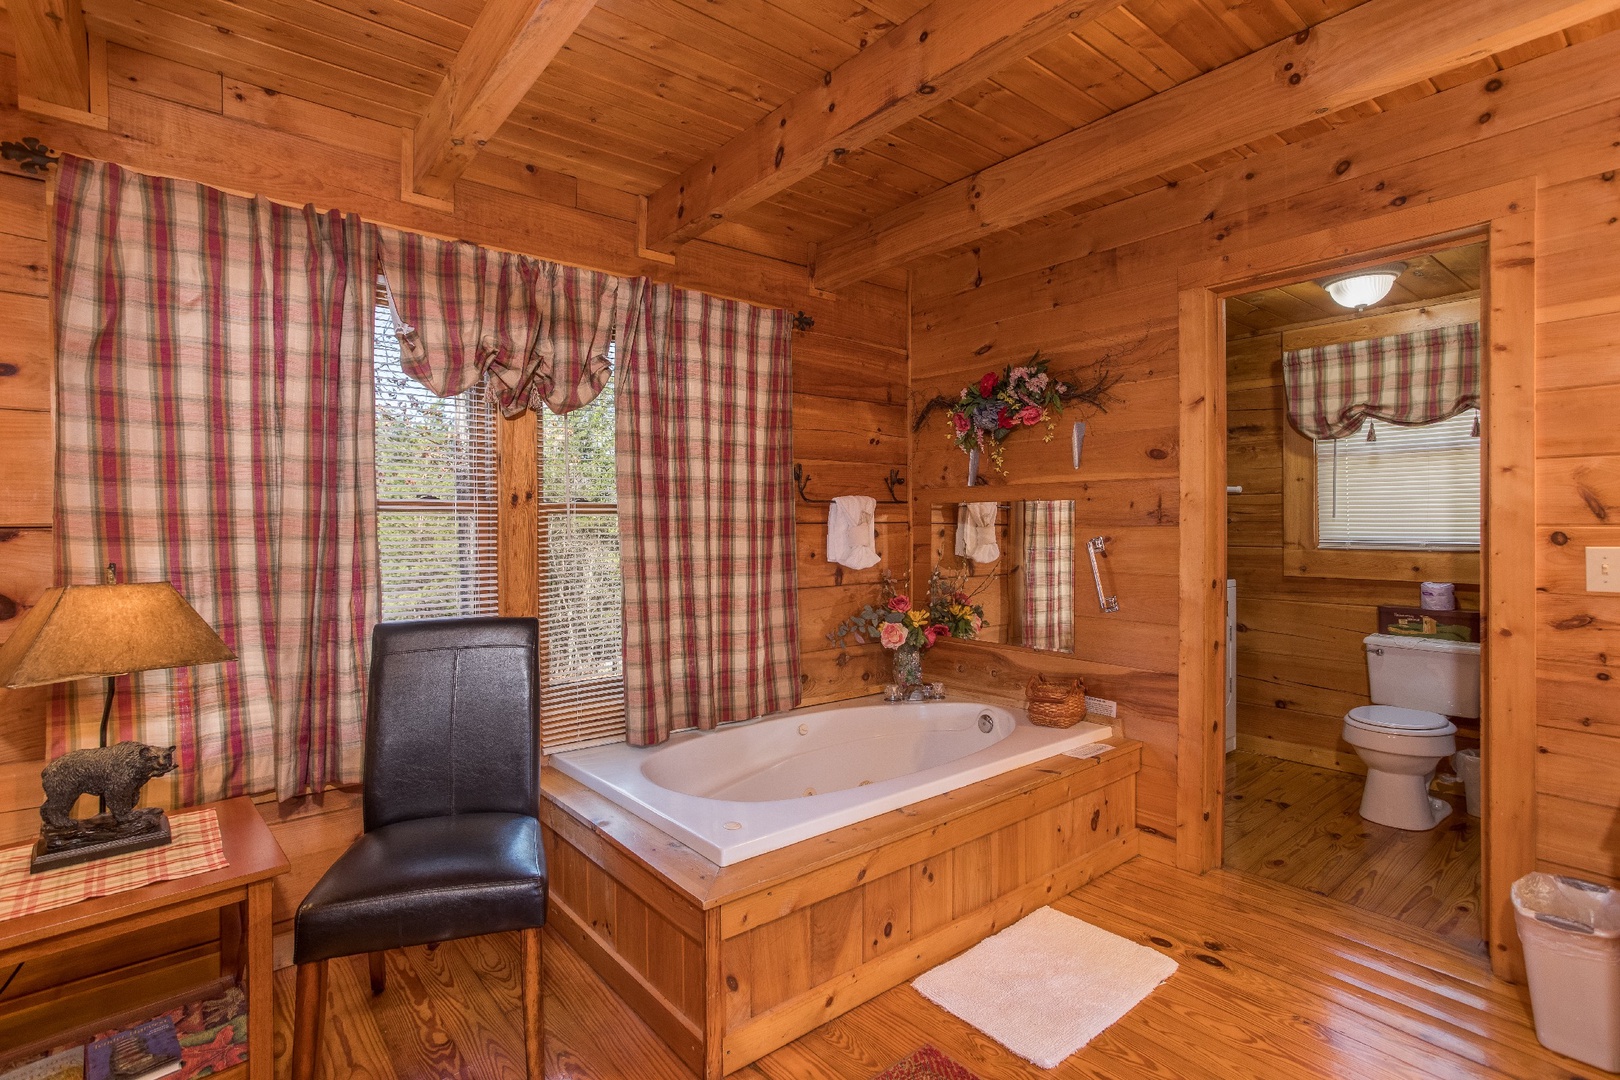 Jacuzzi tub in the first floor bedroom with an ensuite at Cloud 9, a 1-bedroom cabin rental located in Pigeon Forge